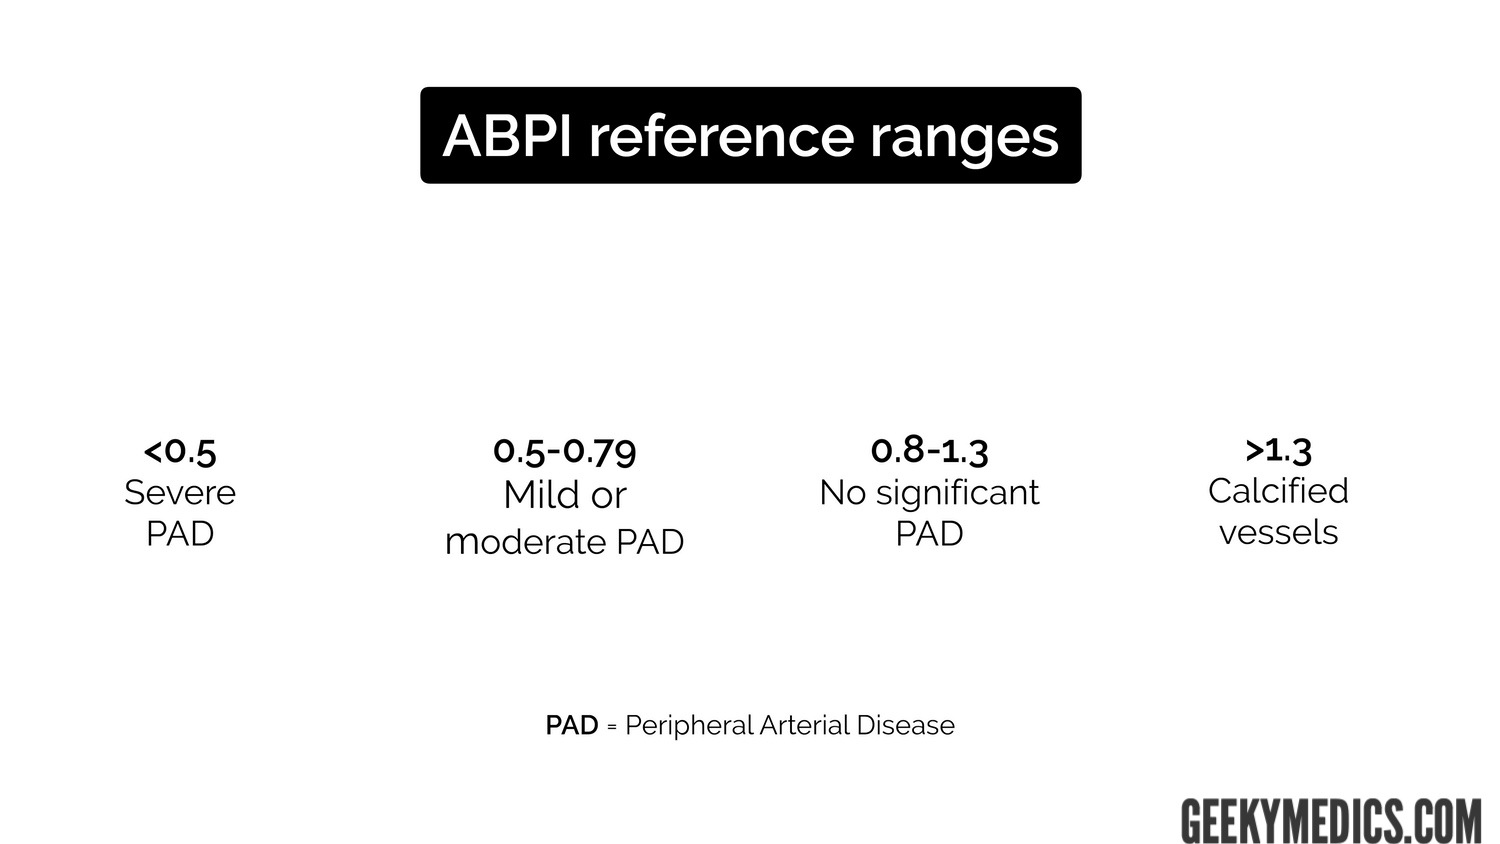 ABPI reference ranges